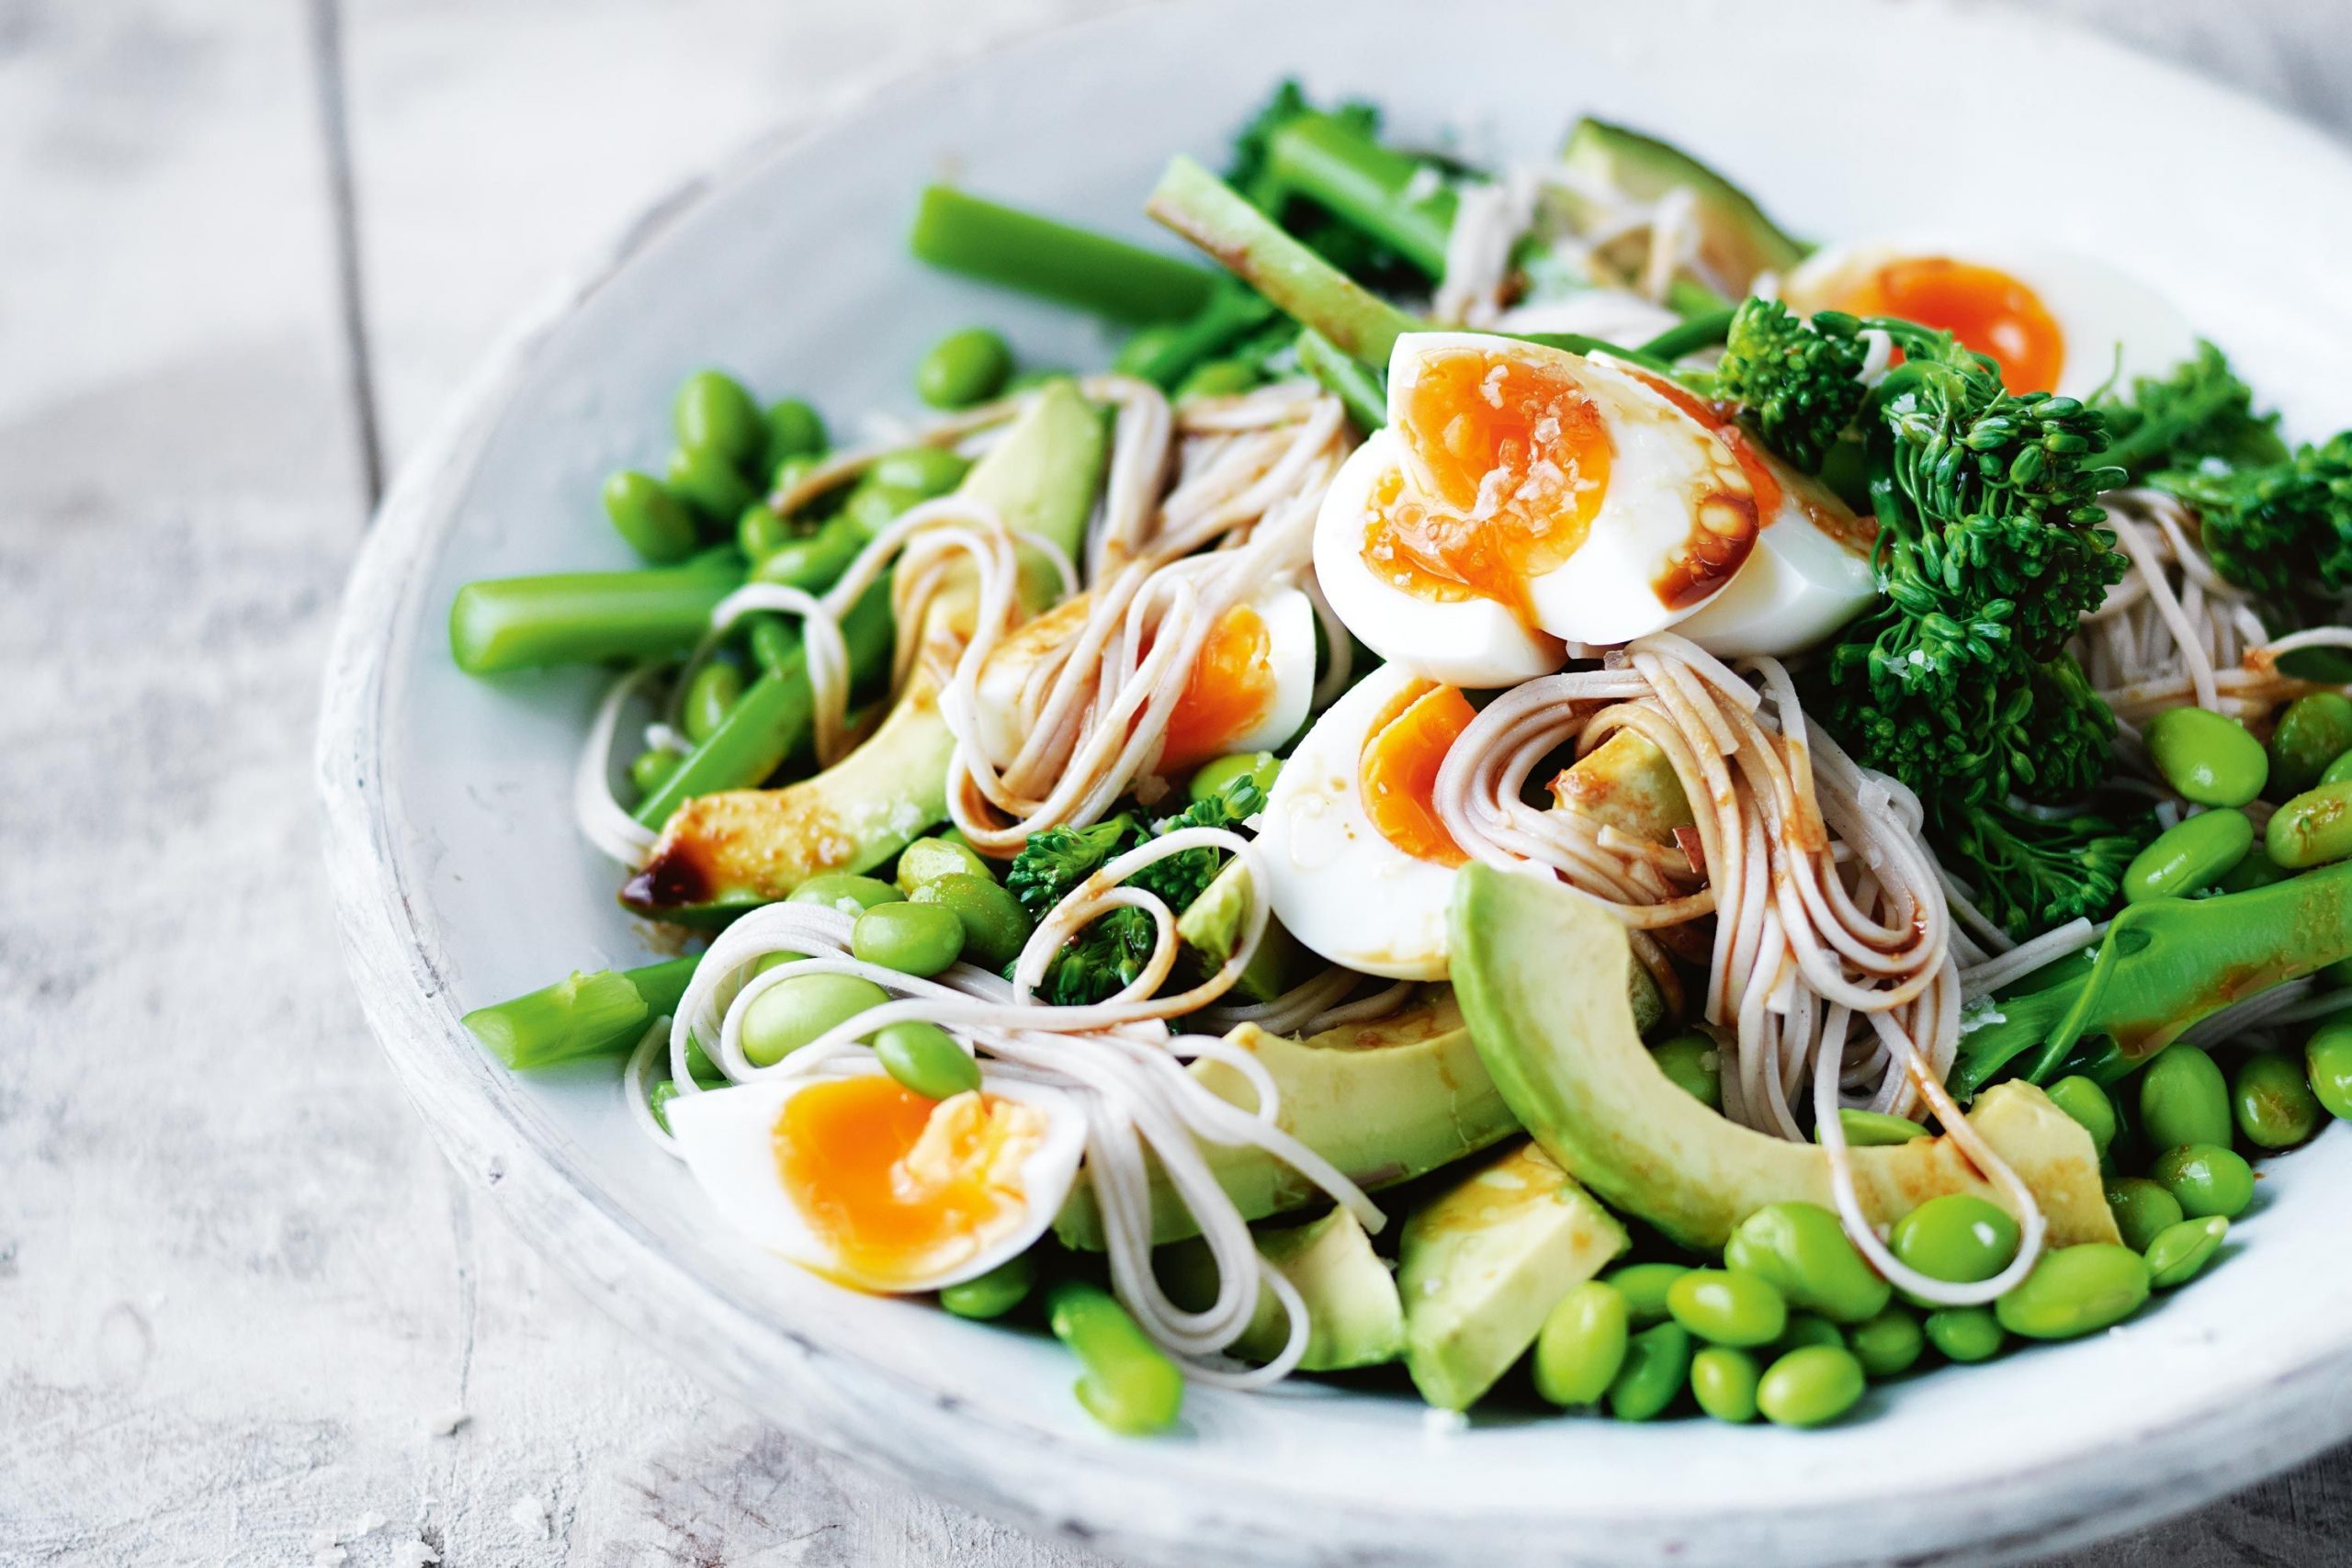 broccolini-and-soba-noodle-salad-with-wasabi-dressing-and-ginger-salt